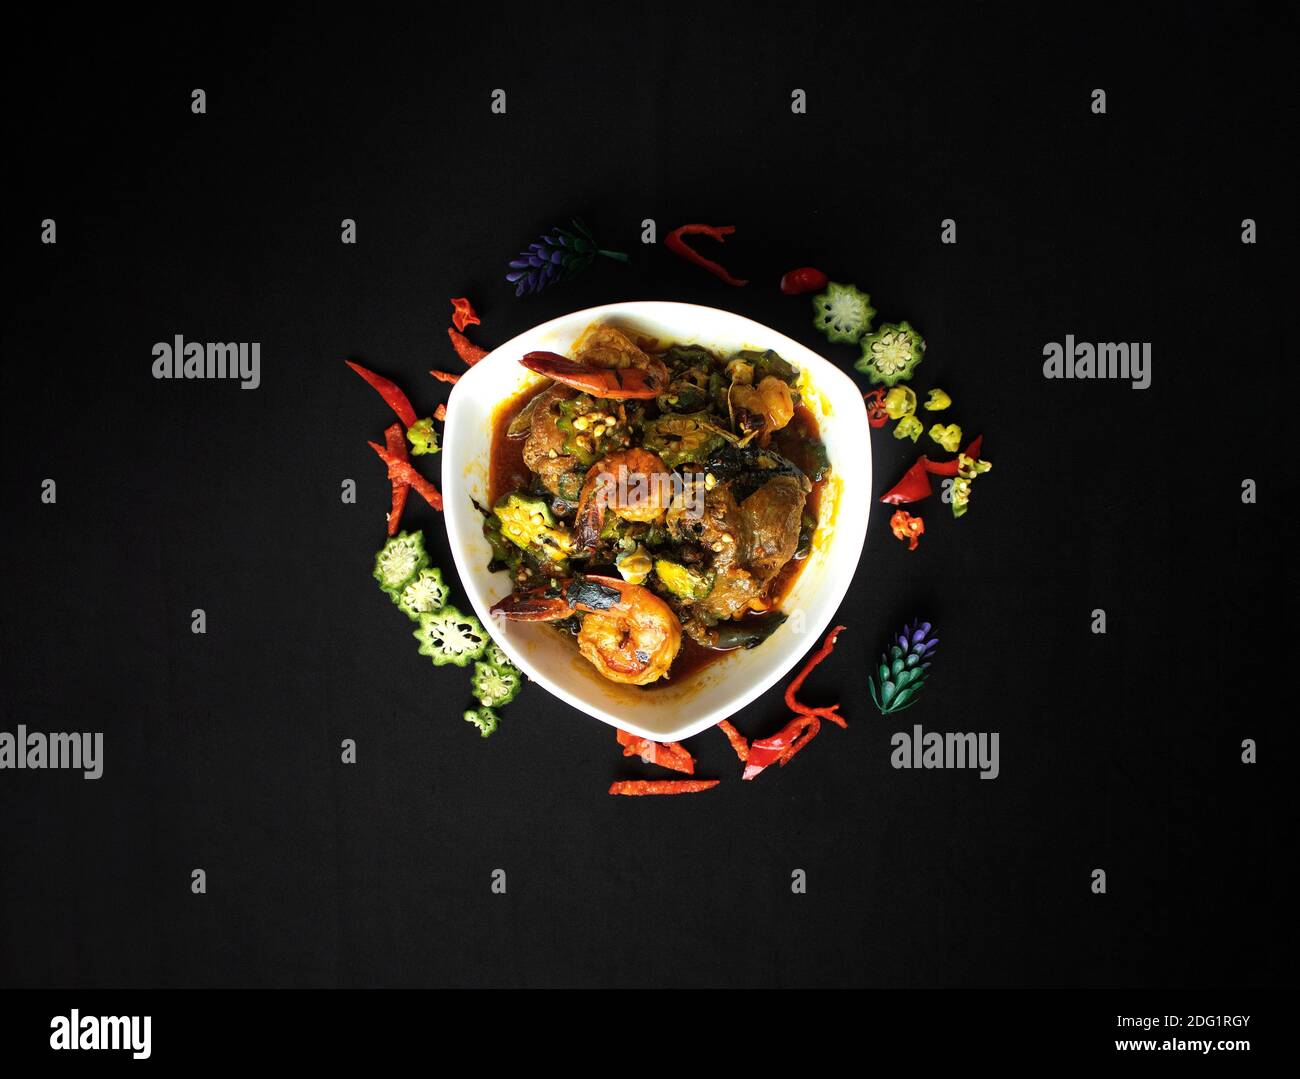 decorated food Stock Photo